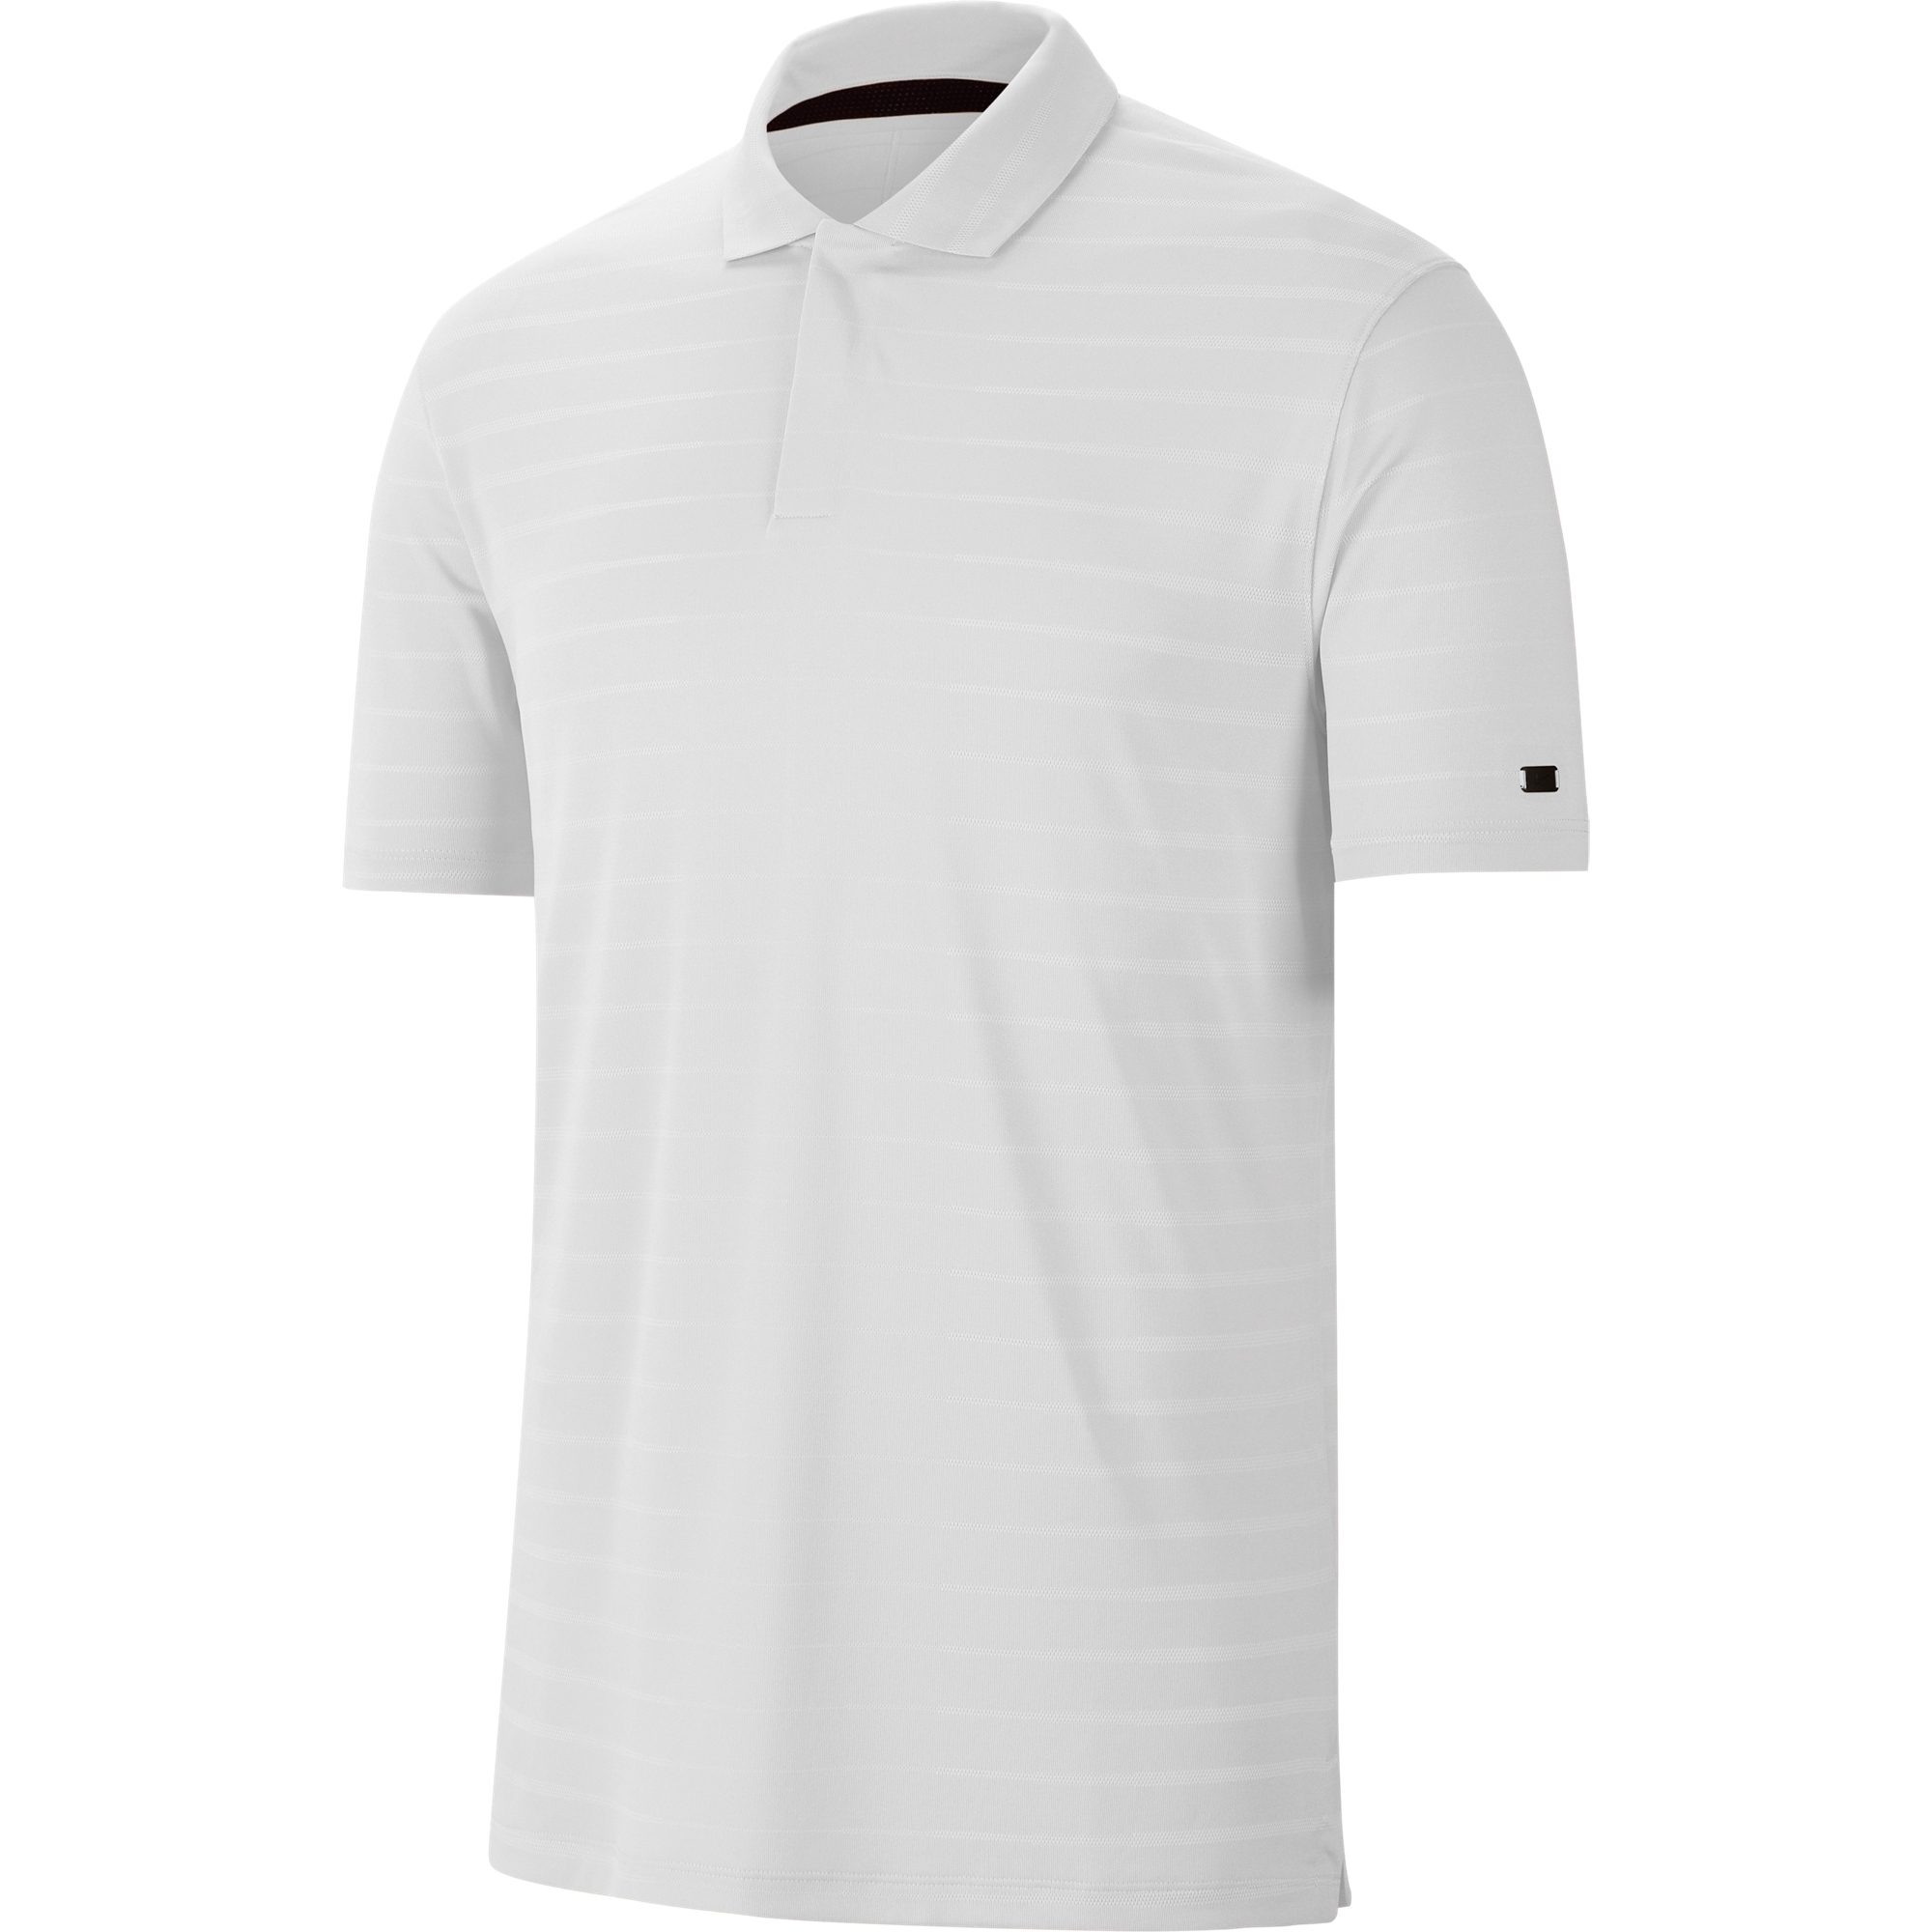 Nike Mens Dry Fit Sweat Wicking Golf Polo Shirt L- Chest 41-44’